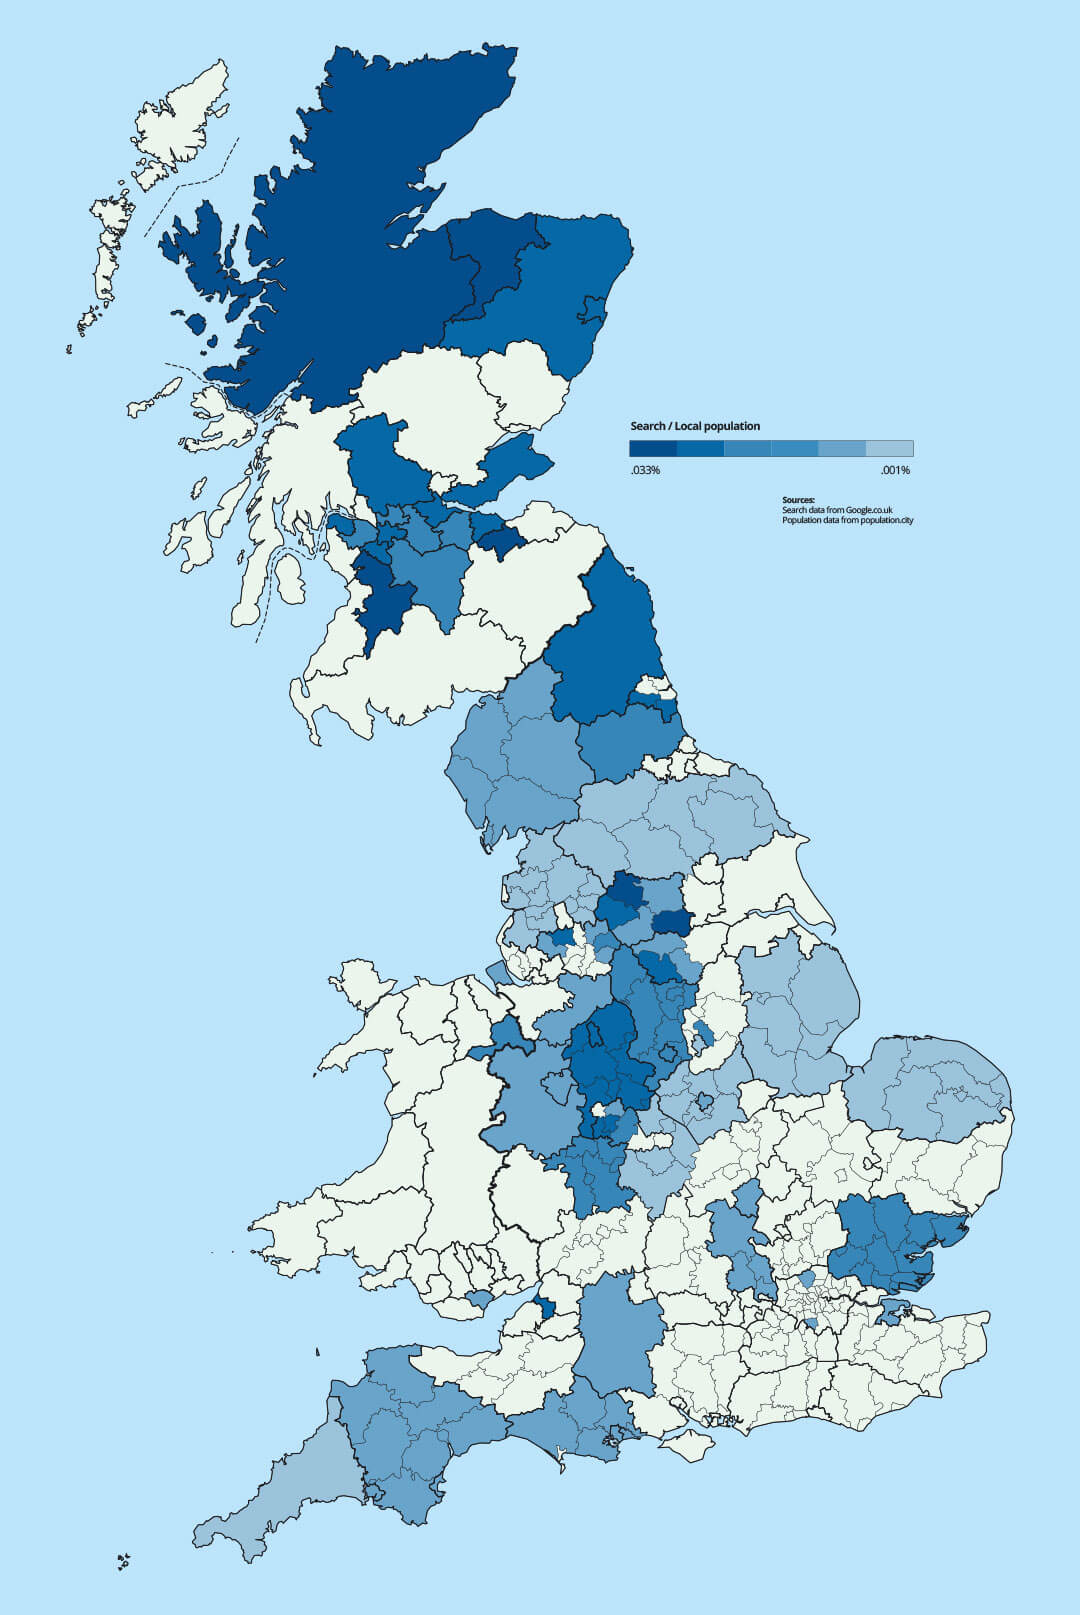 Map showing gritting search data X population